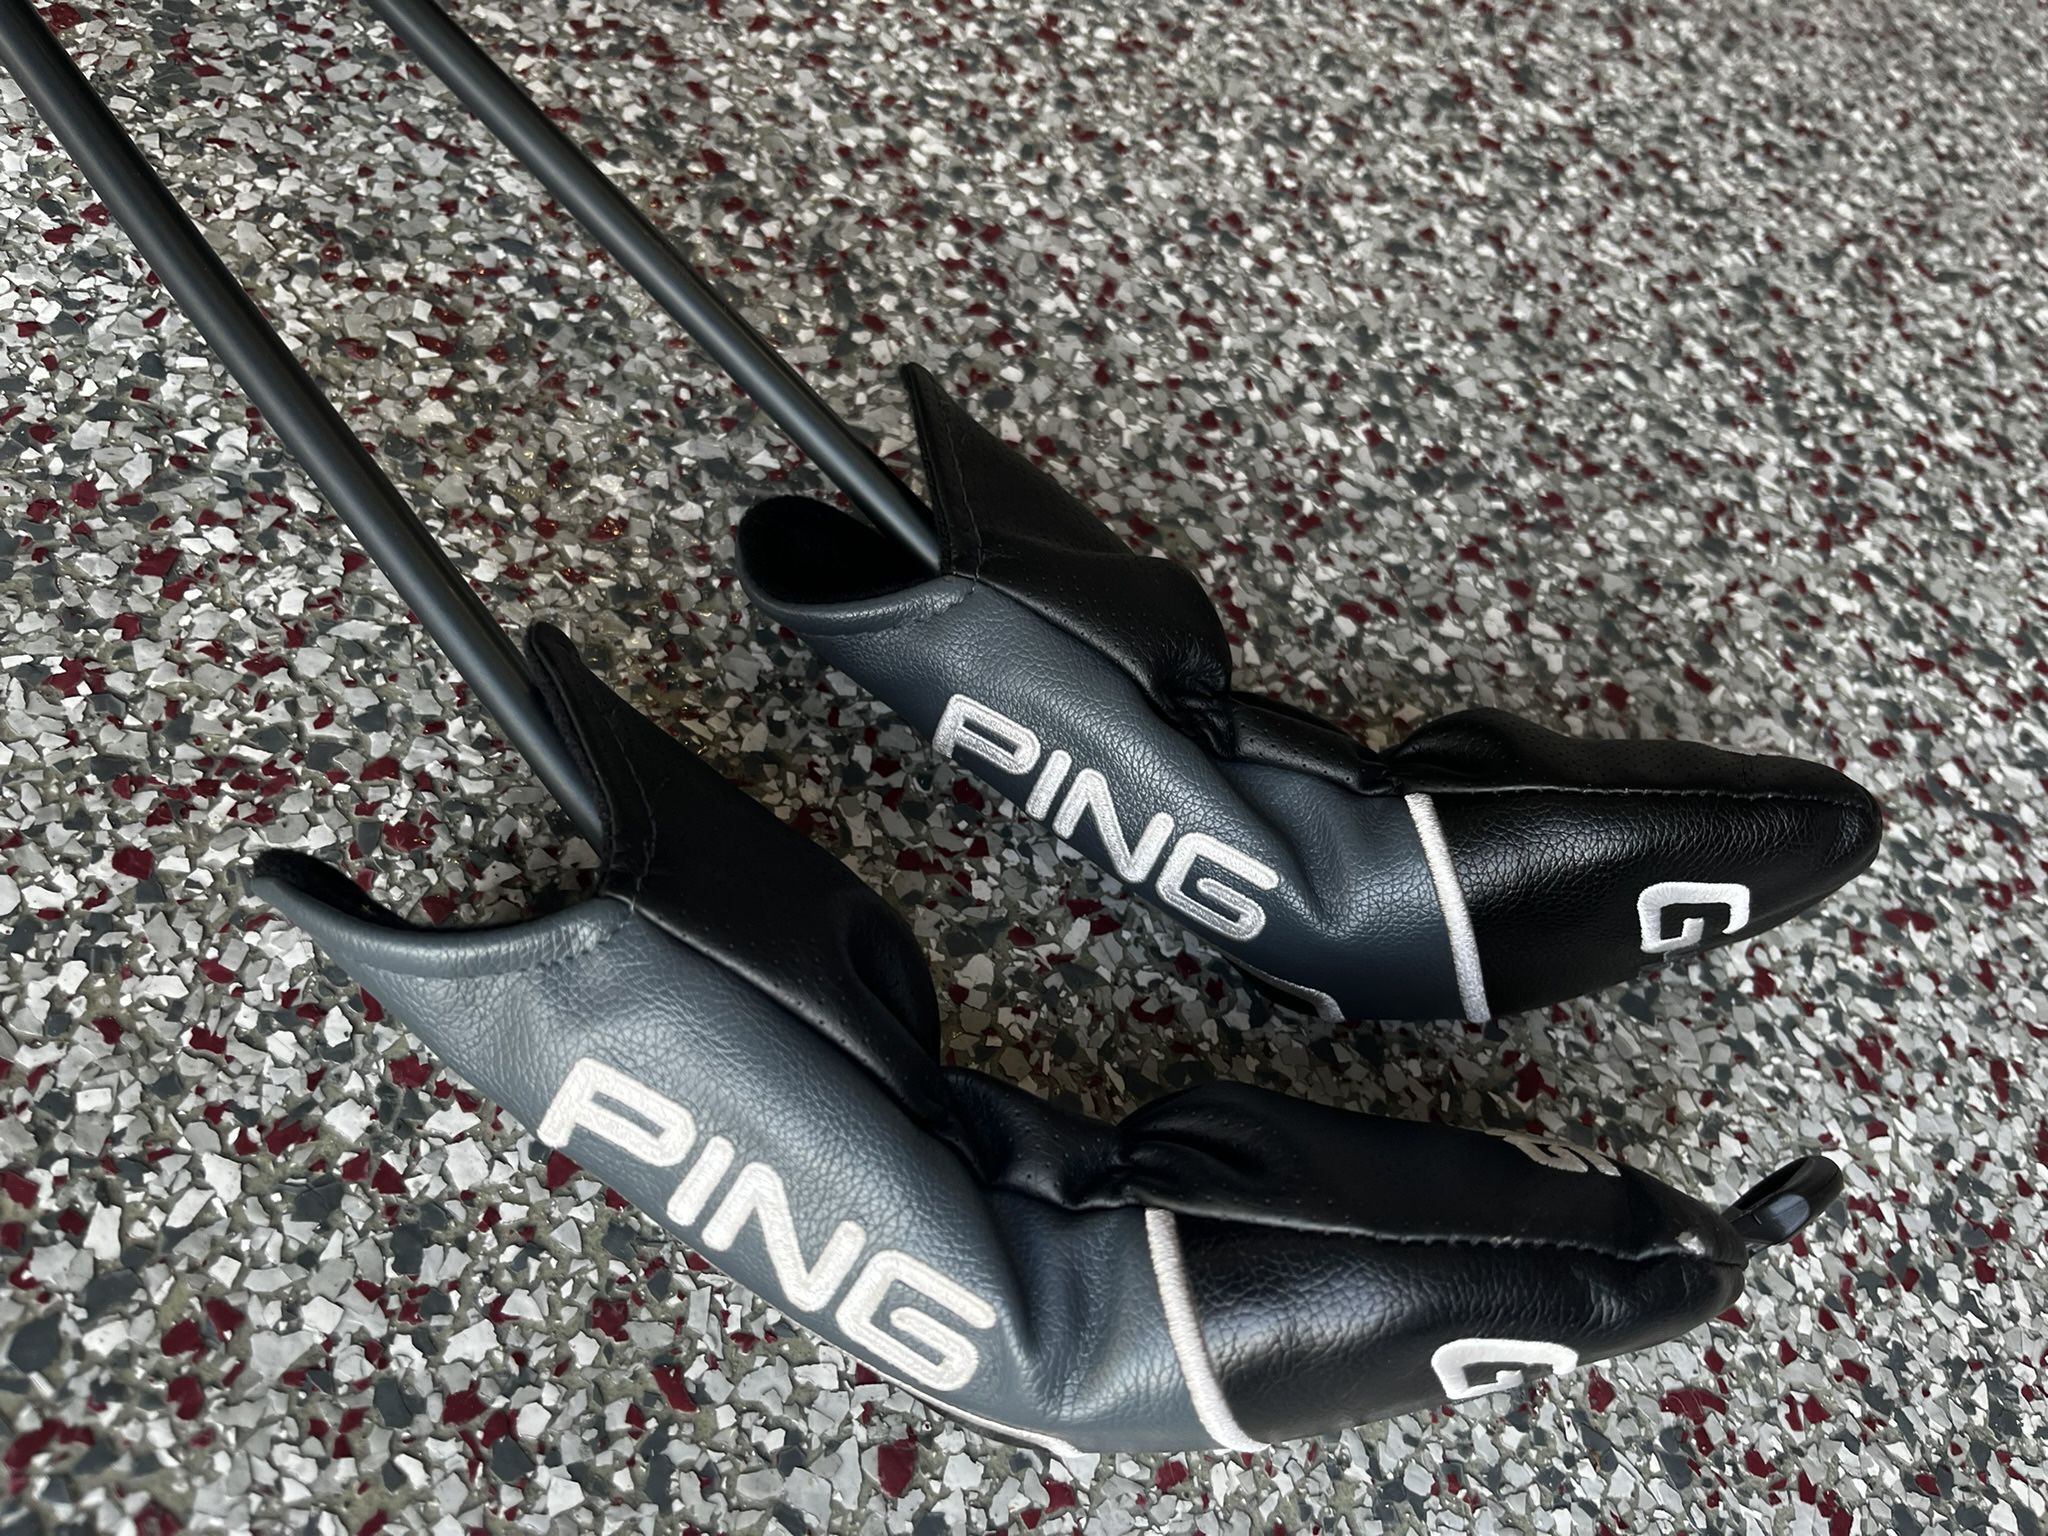 Two Ping Hybrid Golf Clubs (4h + 2h)